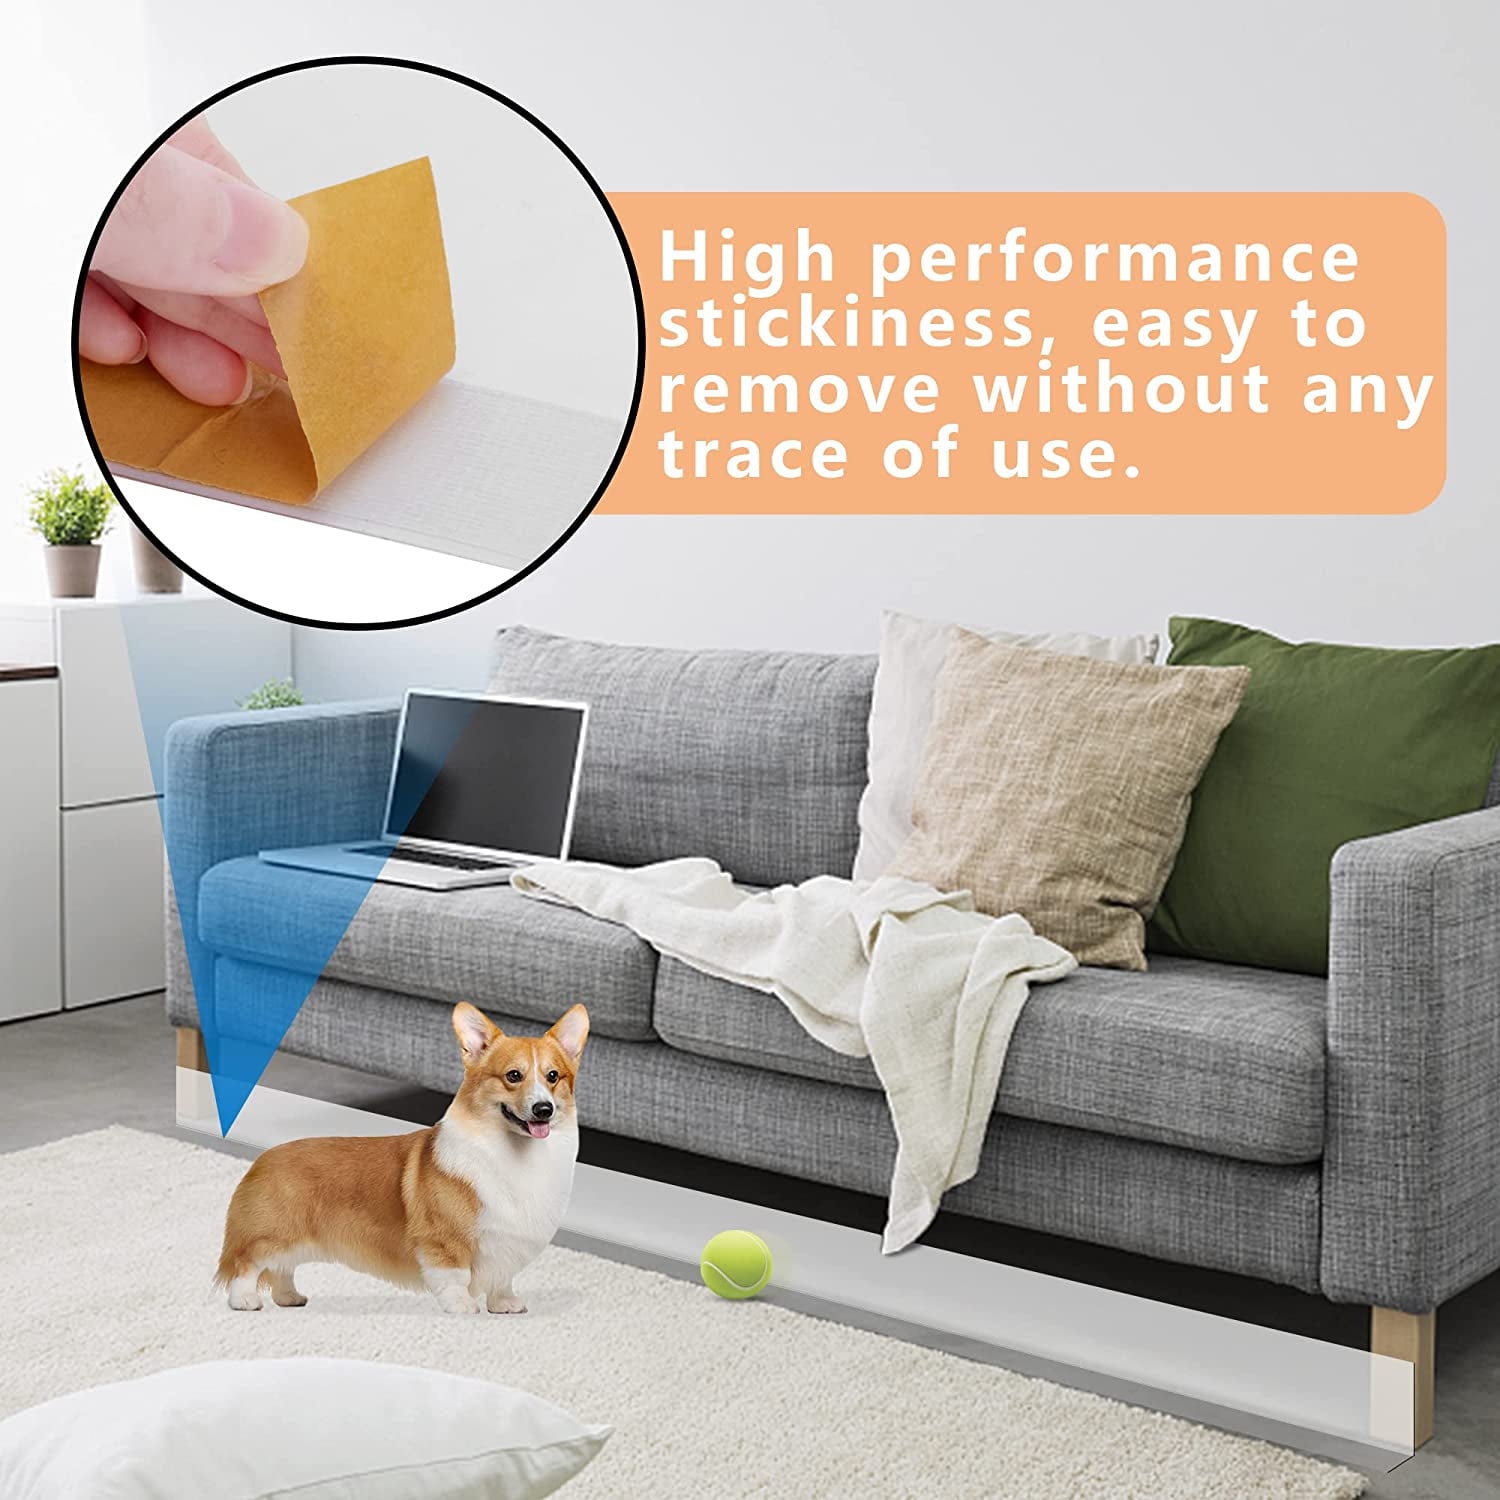 Lorelei Brands 8 Pcs Under Couch Blocker, Pet and Child Toy Bumper with Strong Nano Tape included. Furniture, Floor, Sofa, Appliance Bumpers and